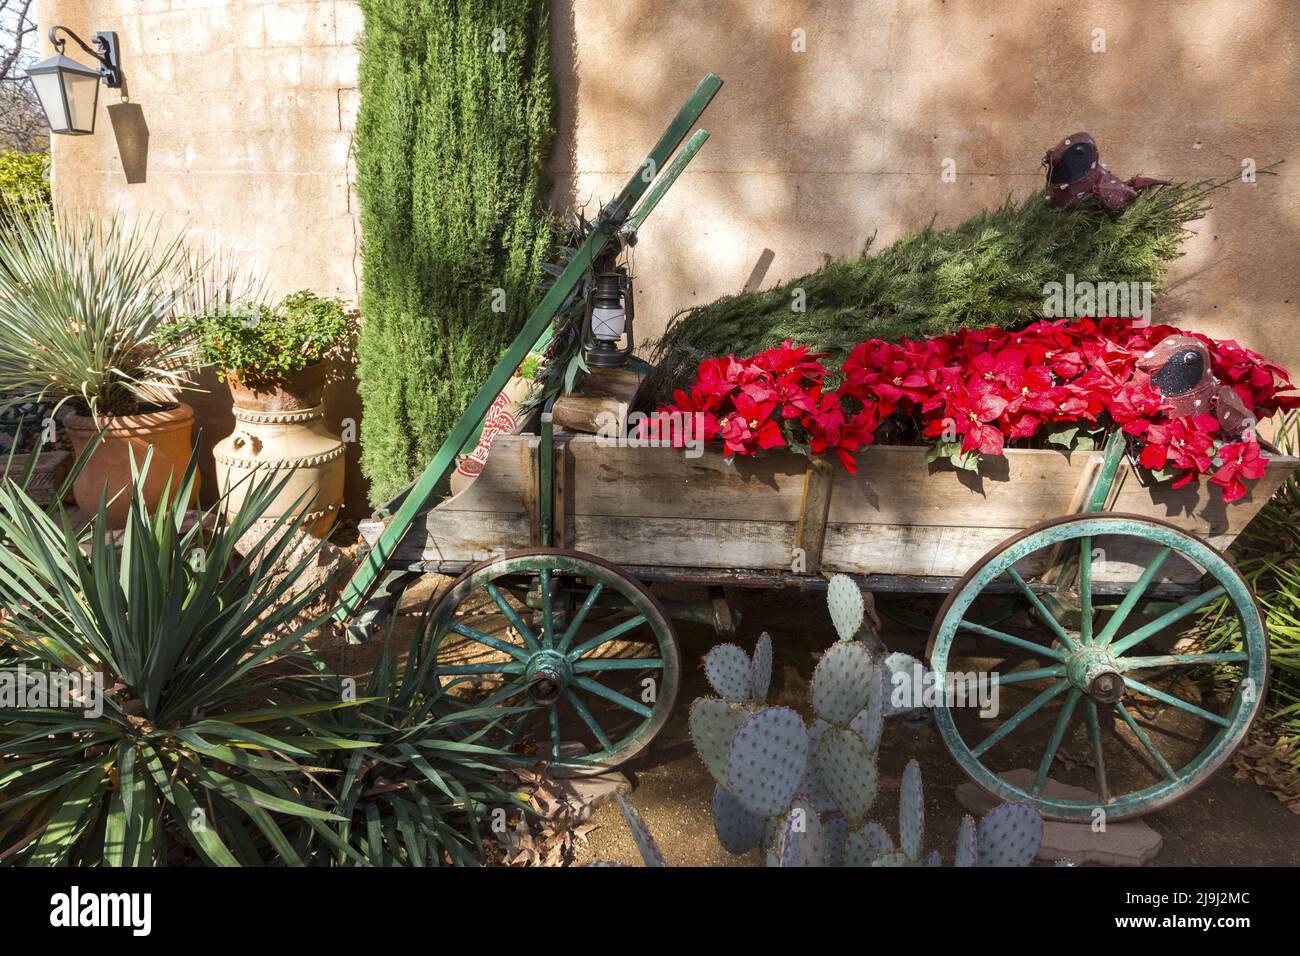 Vintage Horsedrawn Wooden Horse Cart with Red Flowers and Green Cactus Plant Detail in Tlaquepaque Spanish Arts and Crafts Village, Sedona Arizona USA Stock Photo